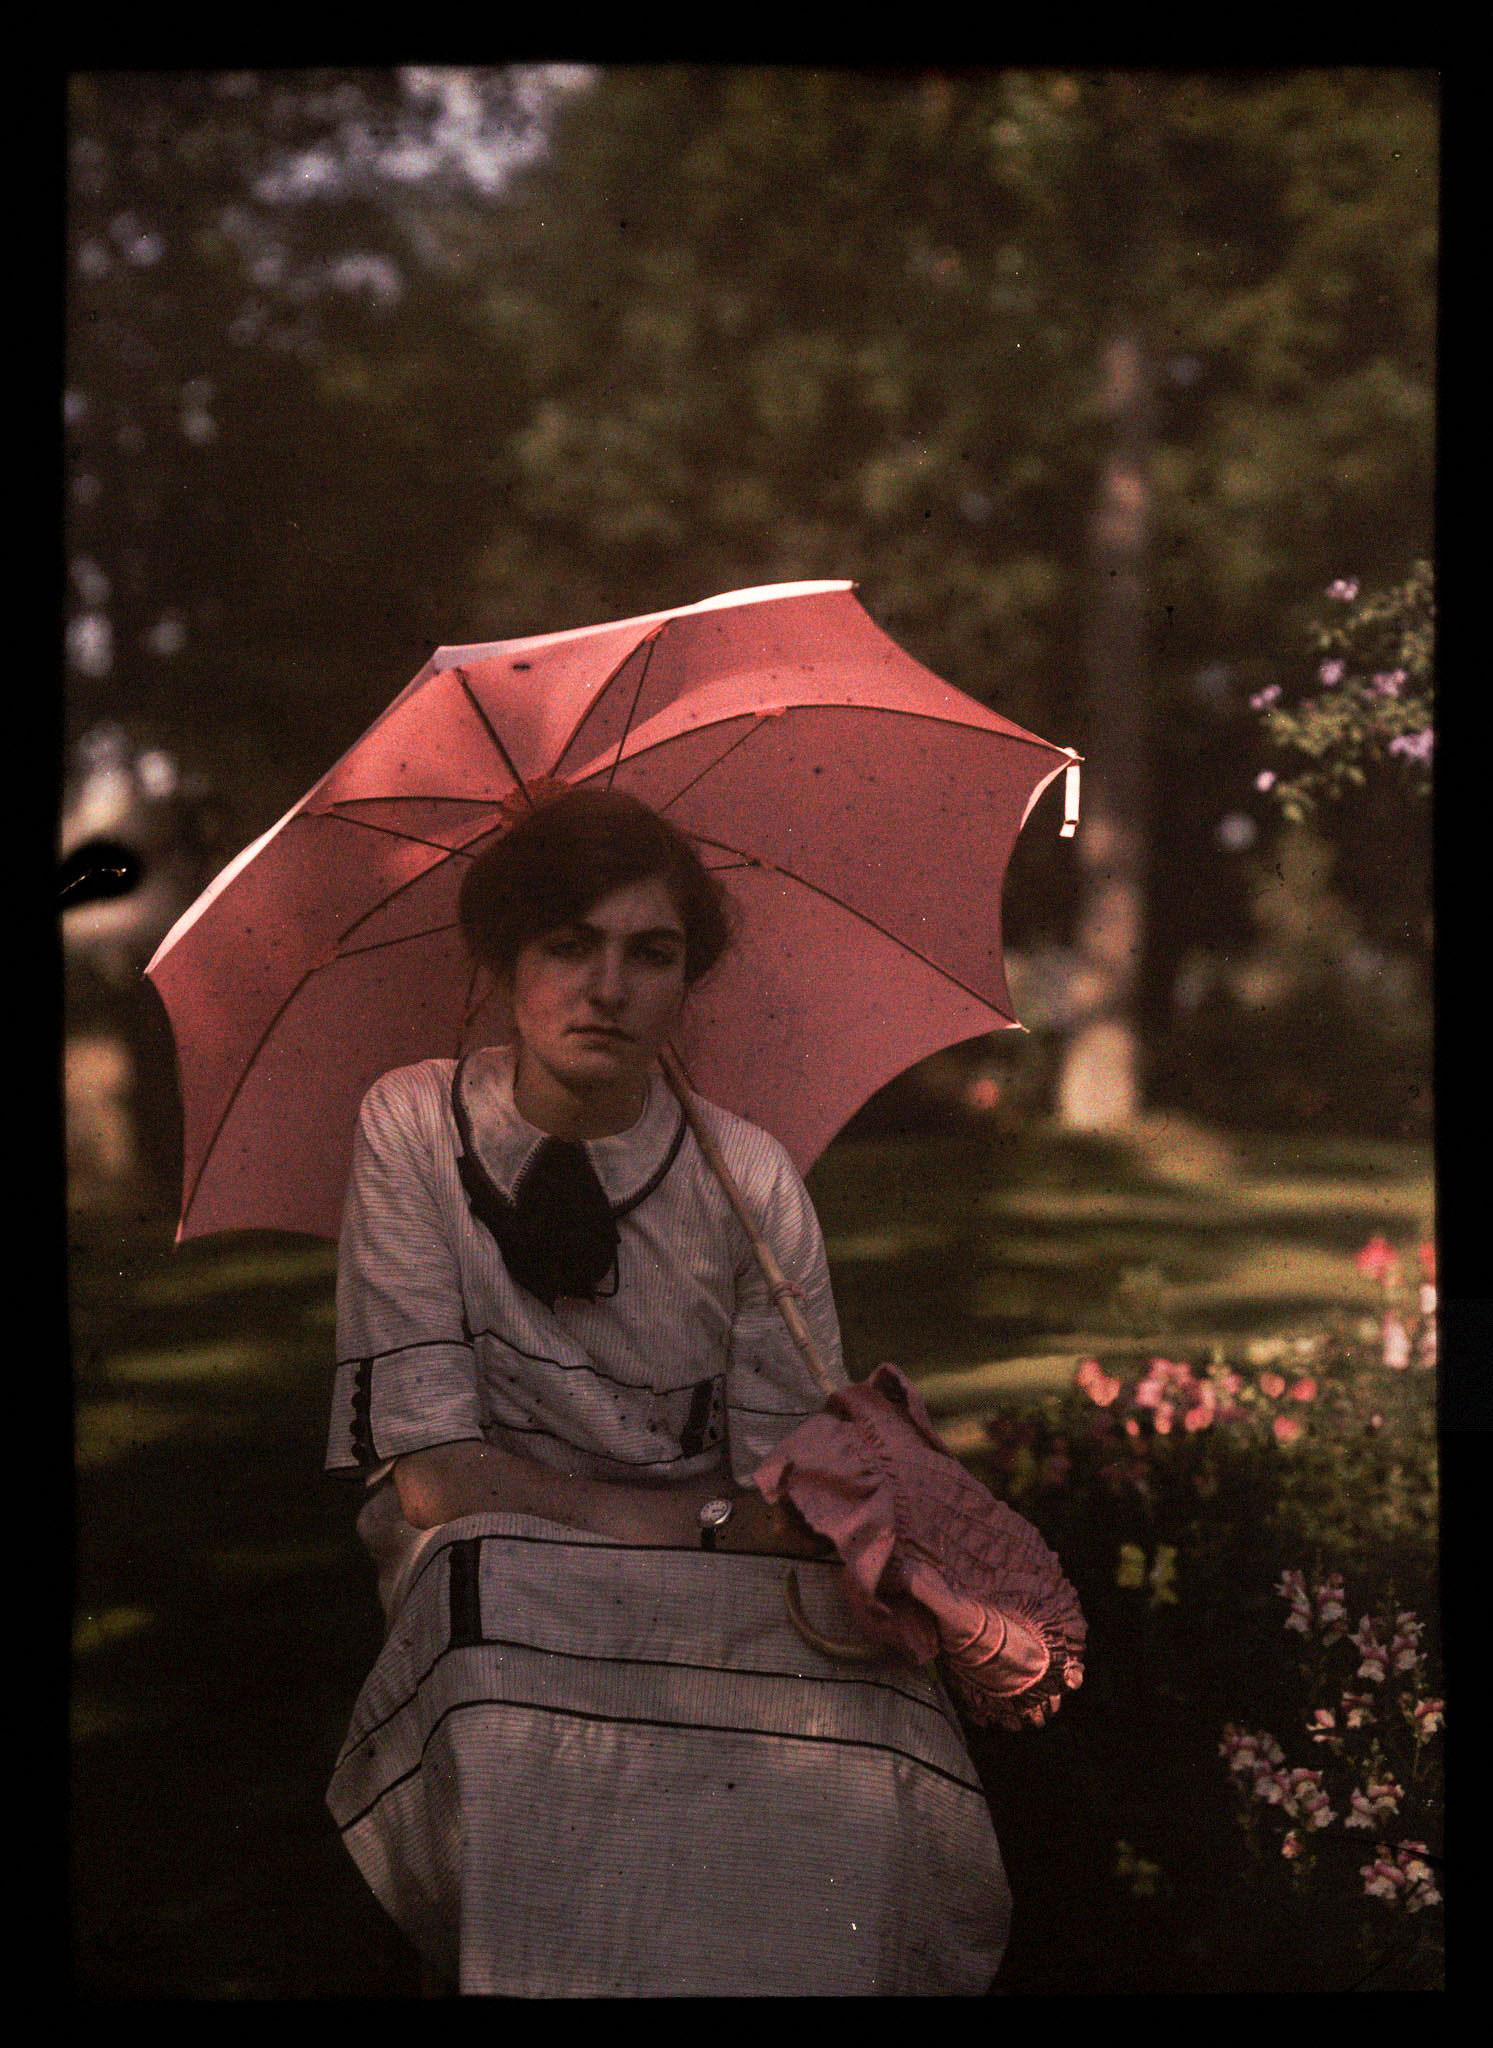 ENGLAND - SEPTEMBER 03:  An autochrome of a young girl, daughter of the photographer, sitting in the shade in a garden, holding a parasol over her shoulder, taken by Etheldreda Janet Laing. In the summer of 1908 Laing took a series of autochrome portraits of her children in the garden of the family home, Bury Knowle. 